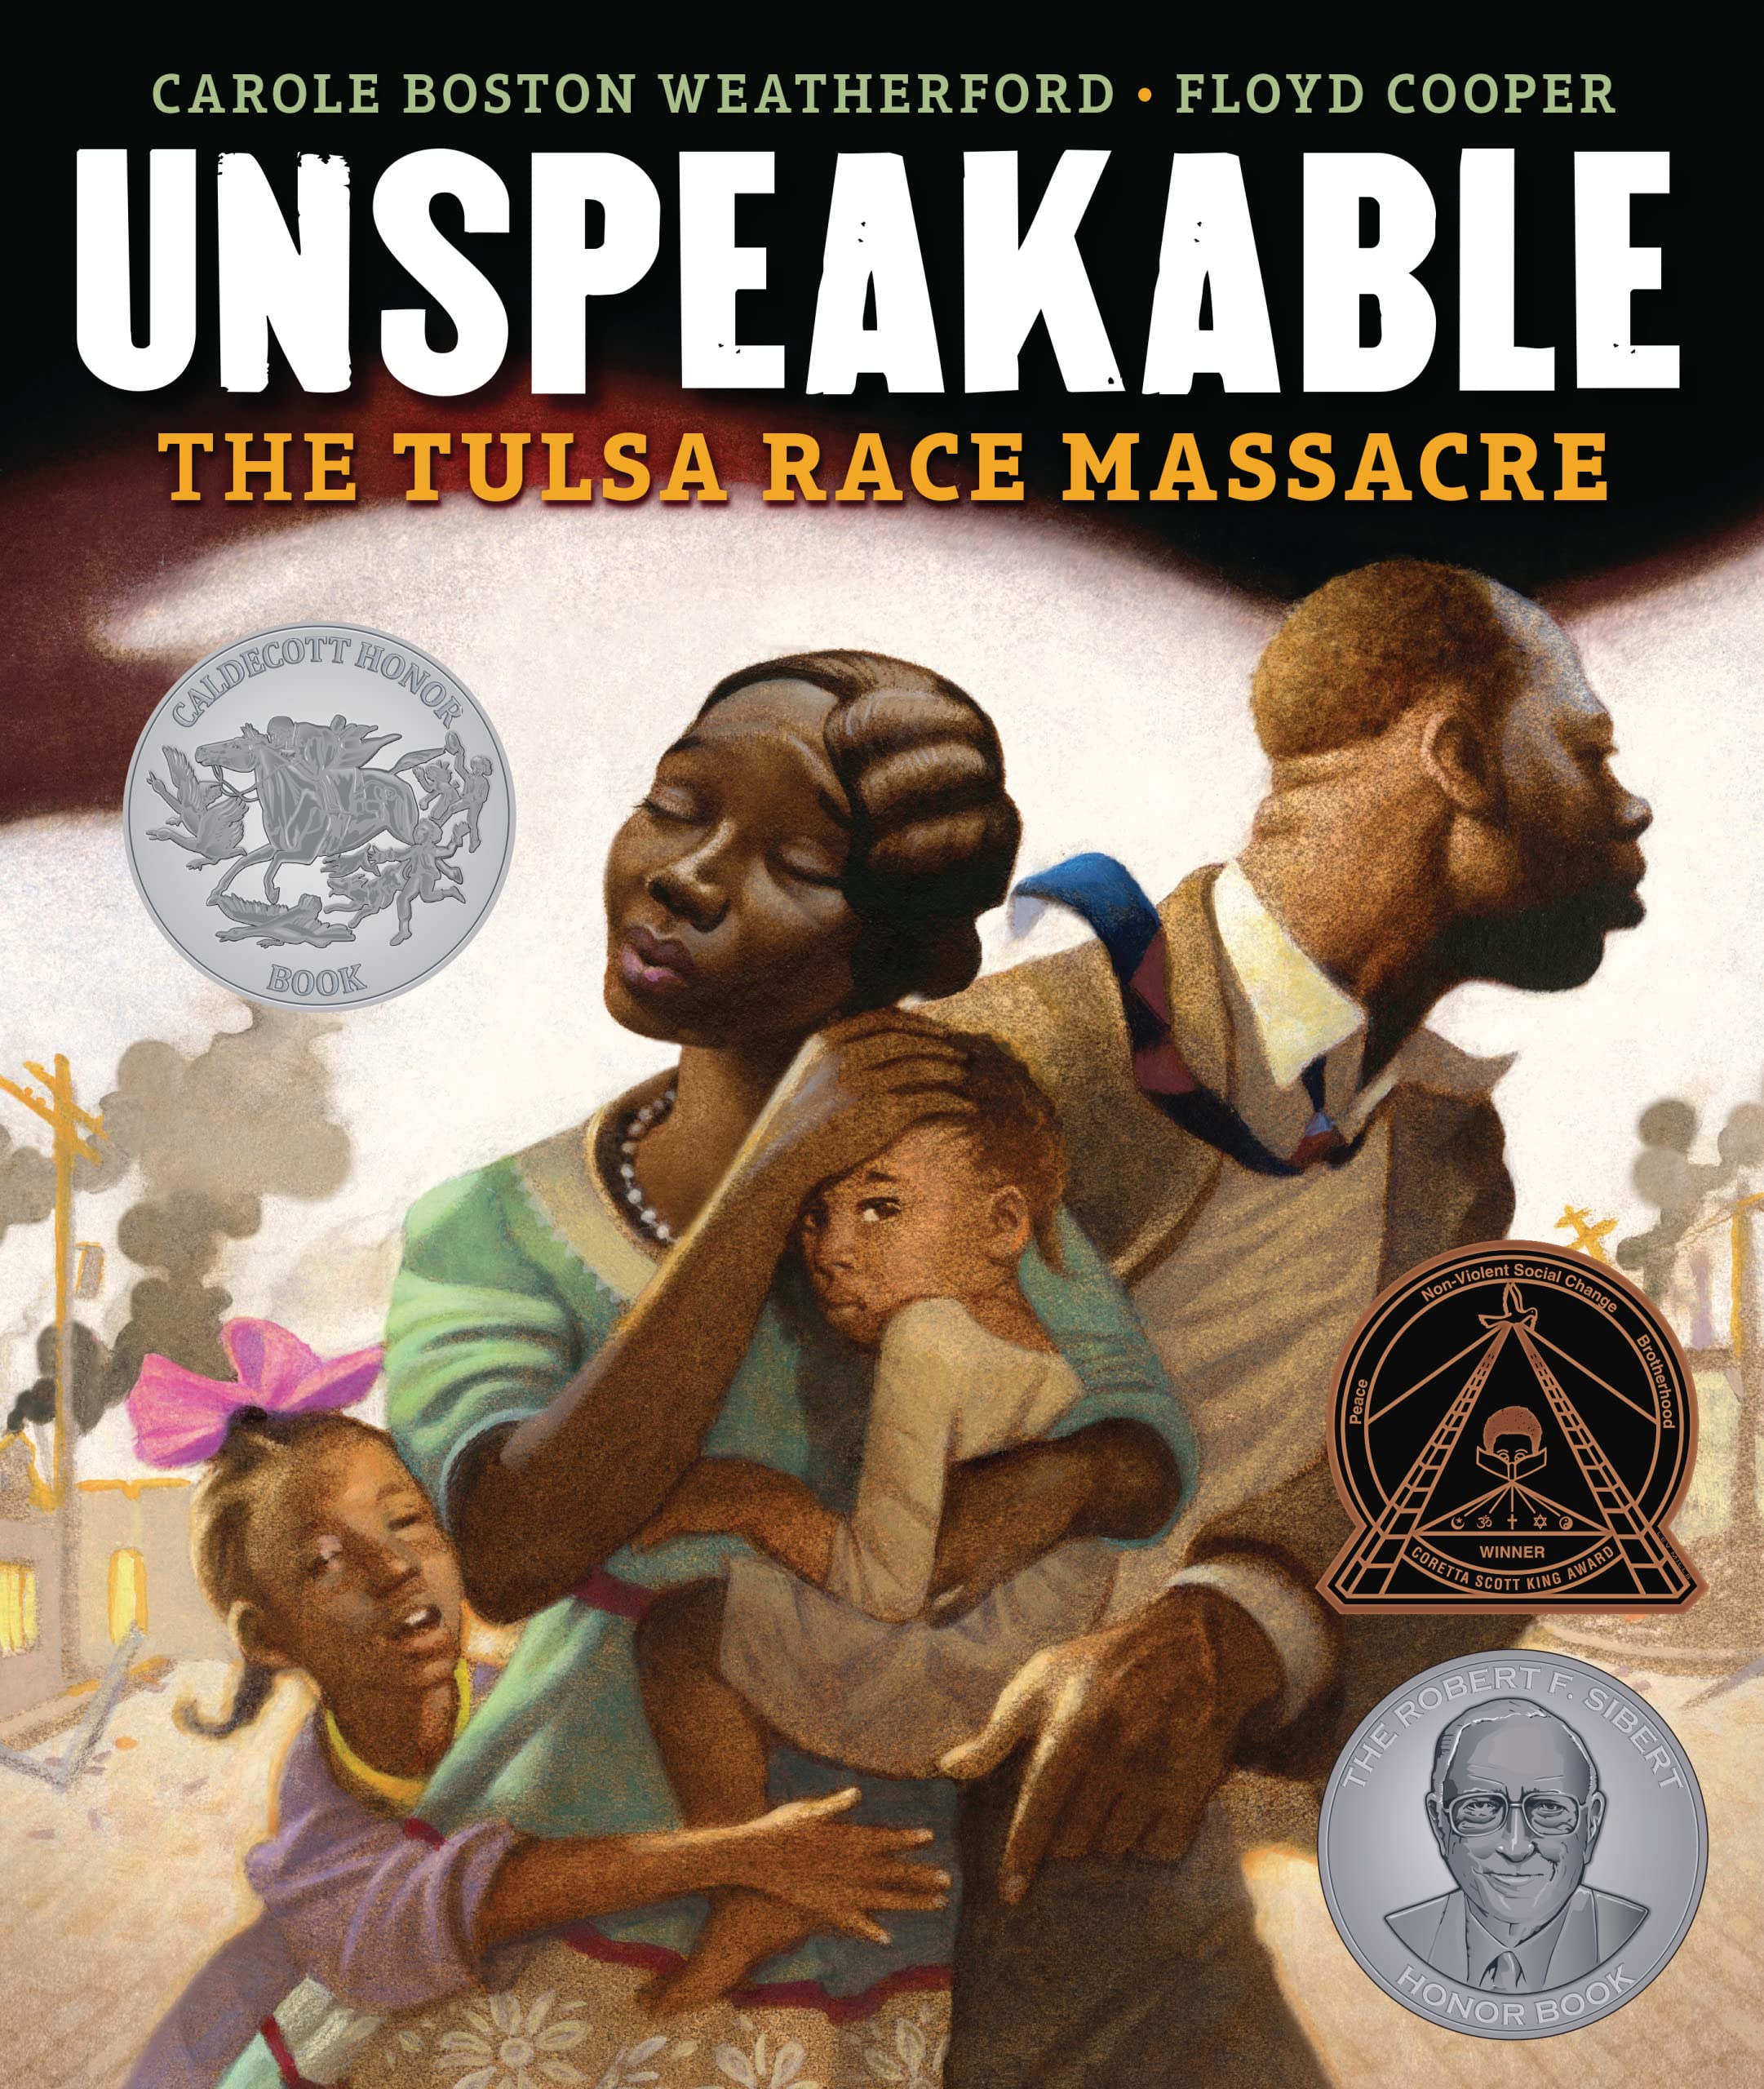 Unspeakable by Carole Boston Weatherford and Floyd Cooper